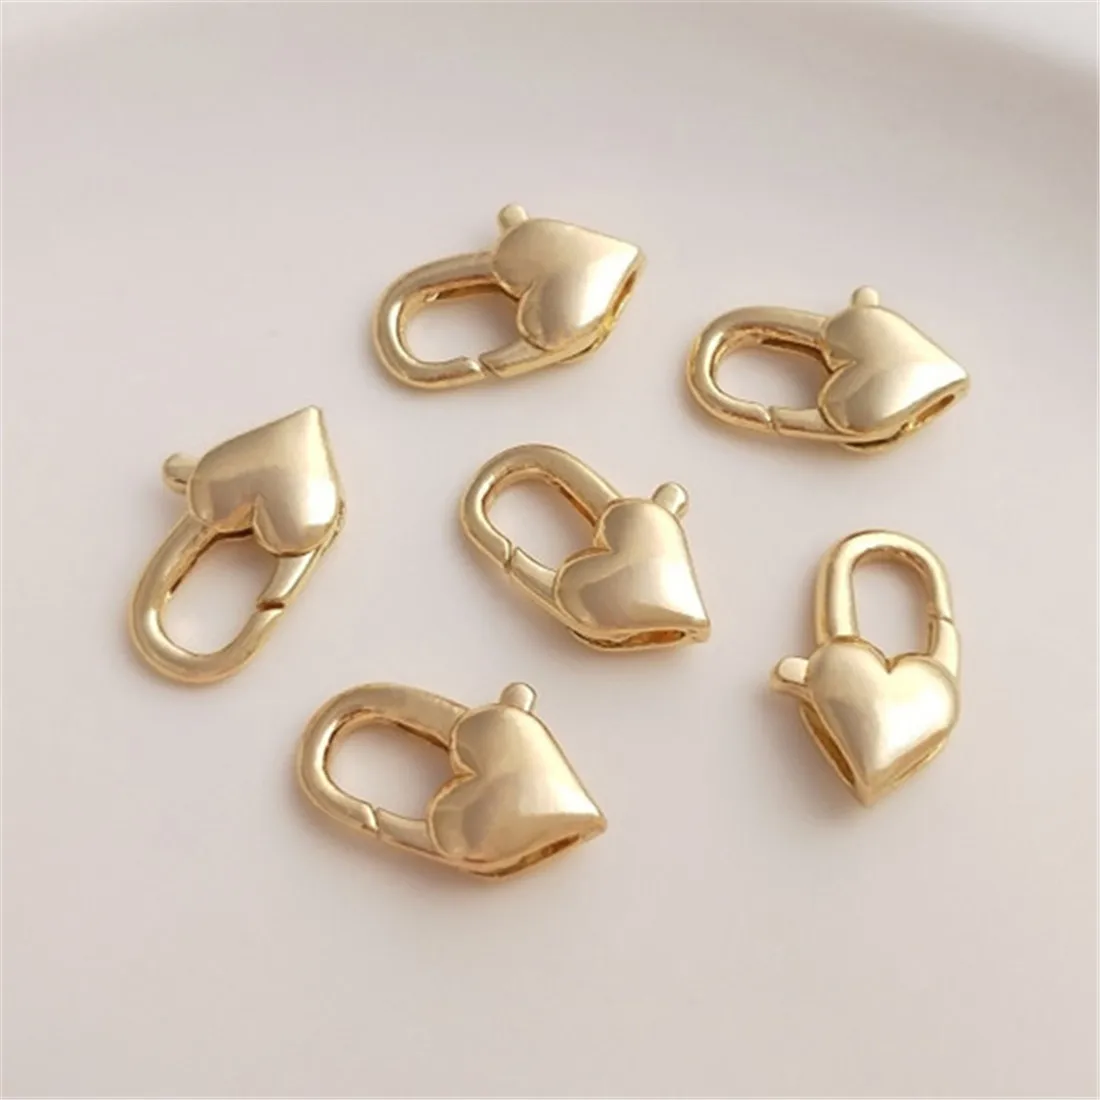 14K Gold Heart-shaped Chain Necklace Clasp Love Lobster Clasp Spring Clasp Diy Handmade Jewelry Accessories B913 50pcs 13mm bag metal buckles dog collar webbing hanger lobster clasp swivel trigger clips snap hook diy accessories